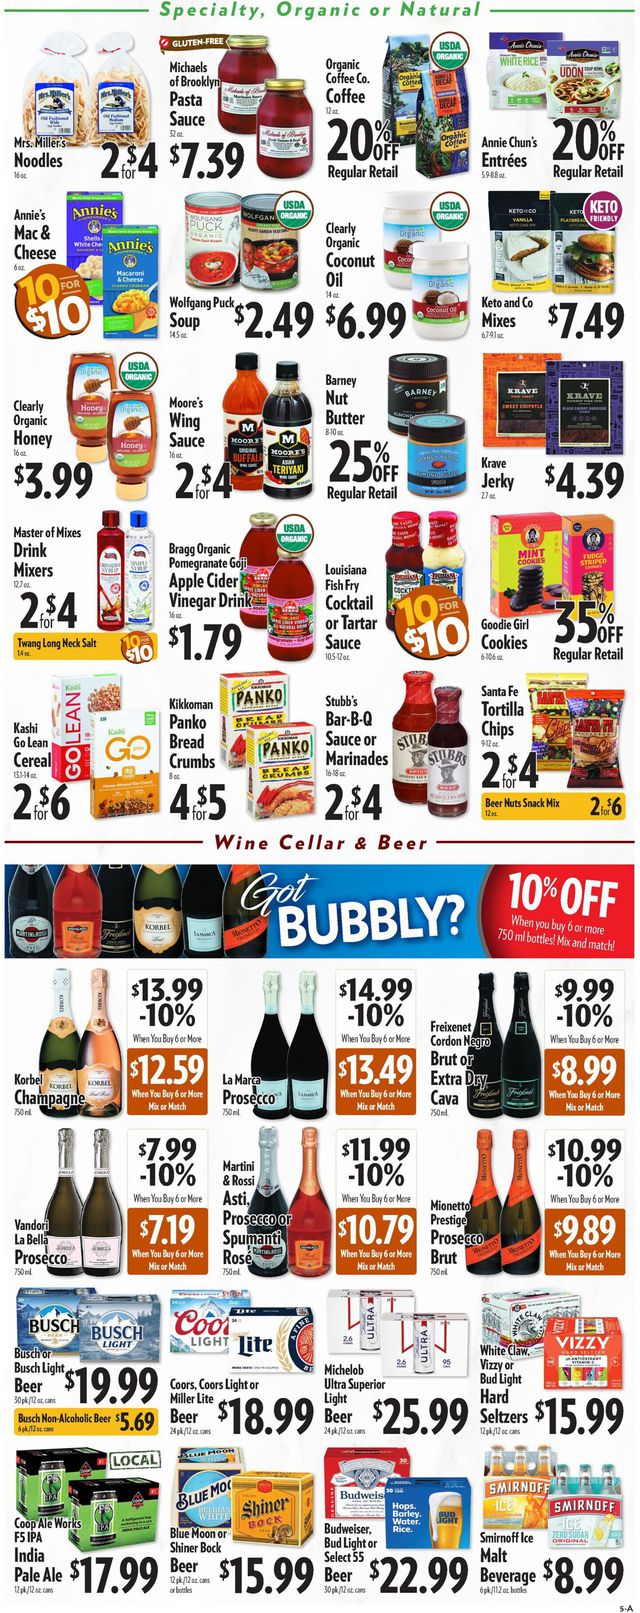 Reasor's Ad from 12/28/2020